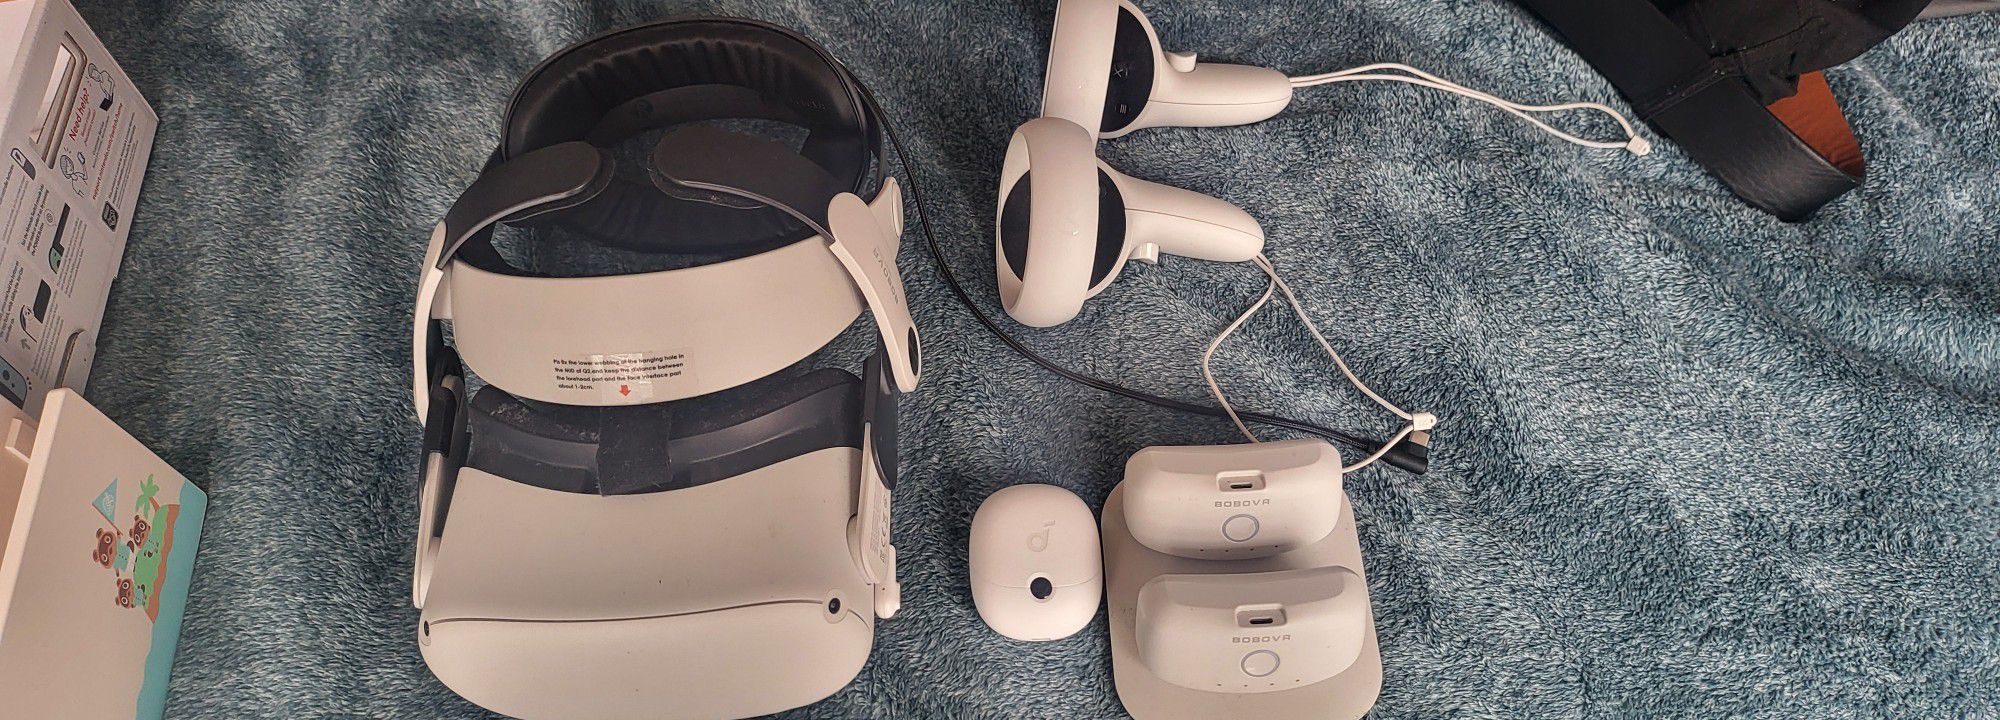 Meta Quest 2 With Bobo Vr Charging Headset 2 Battery Packs And Soundcore Wireless Earbuds